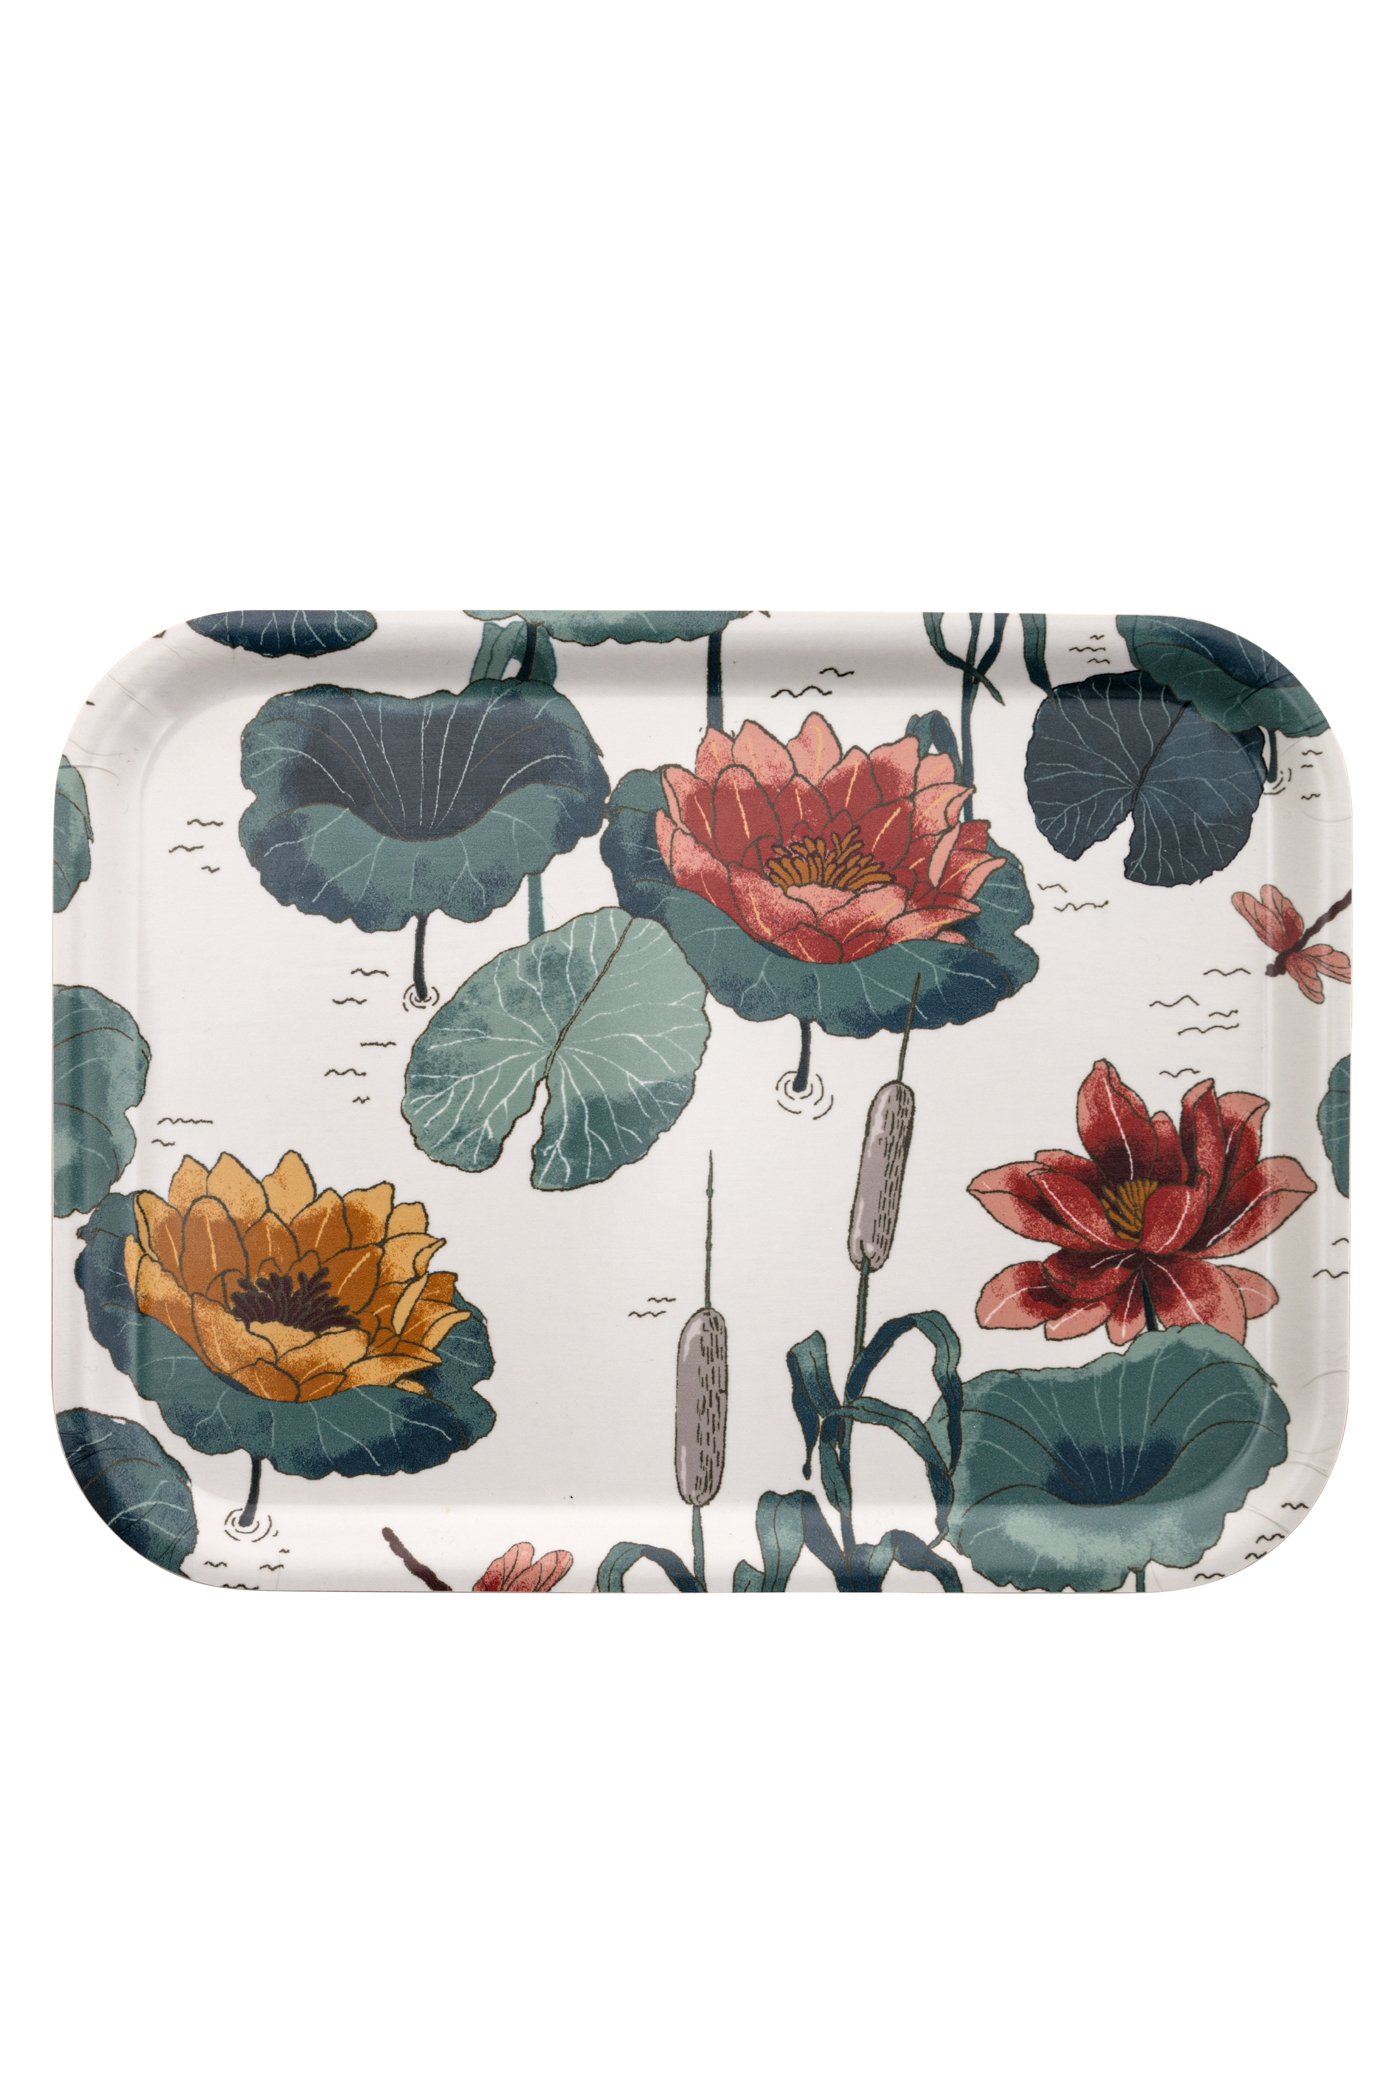 Patterned small tray